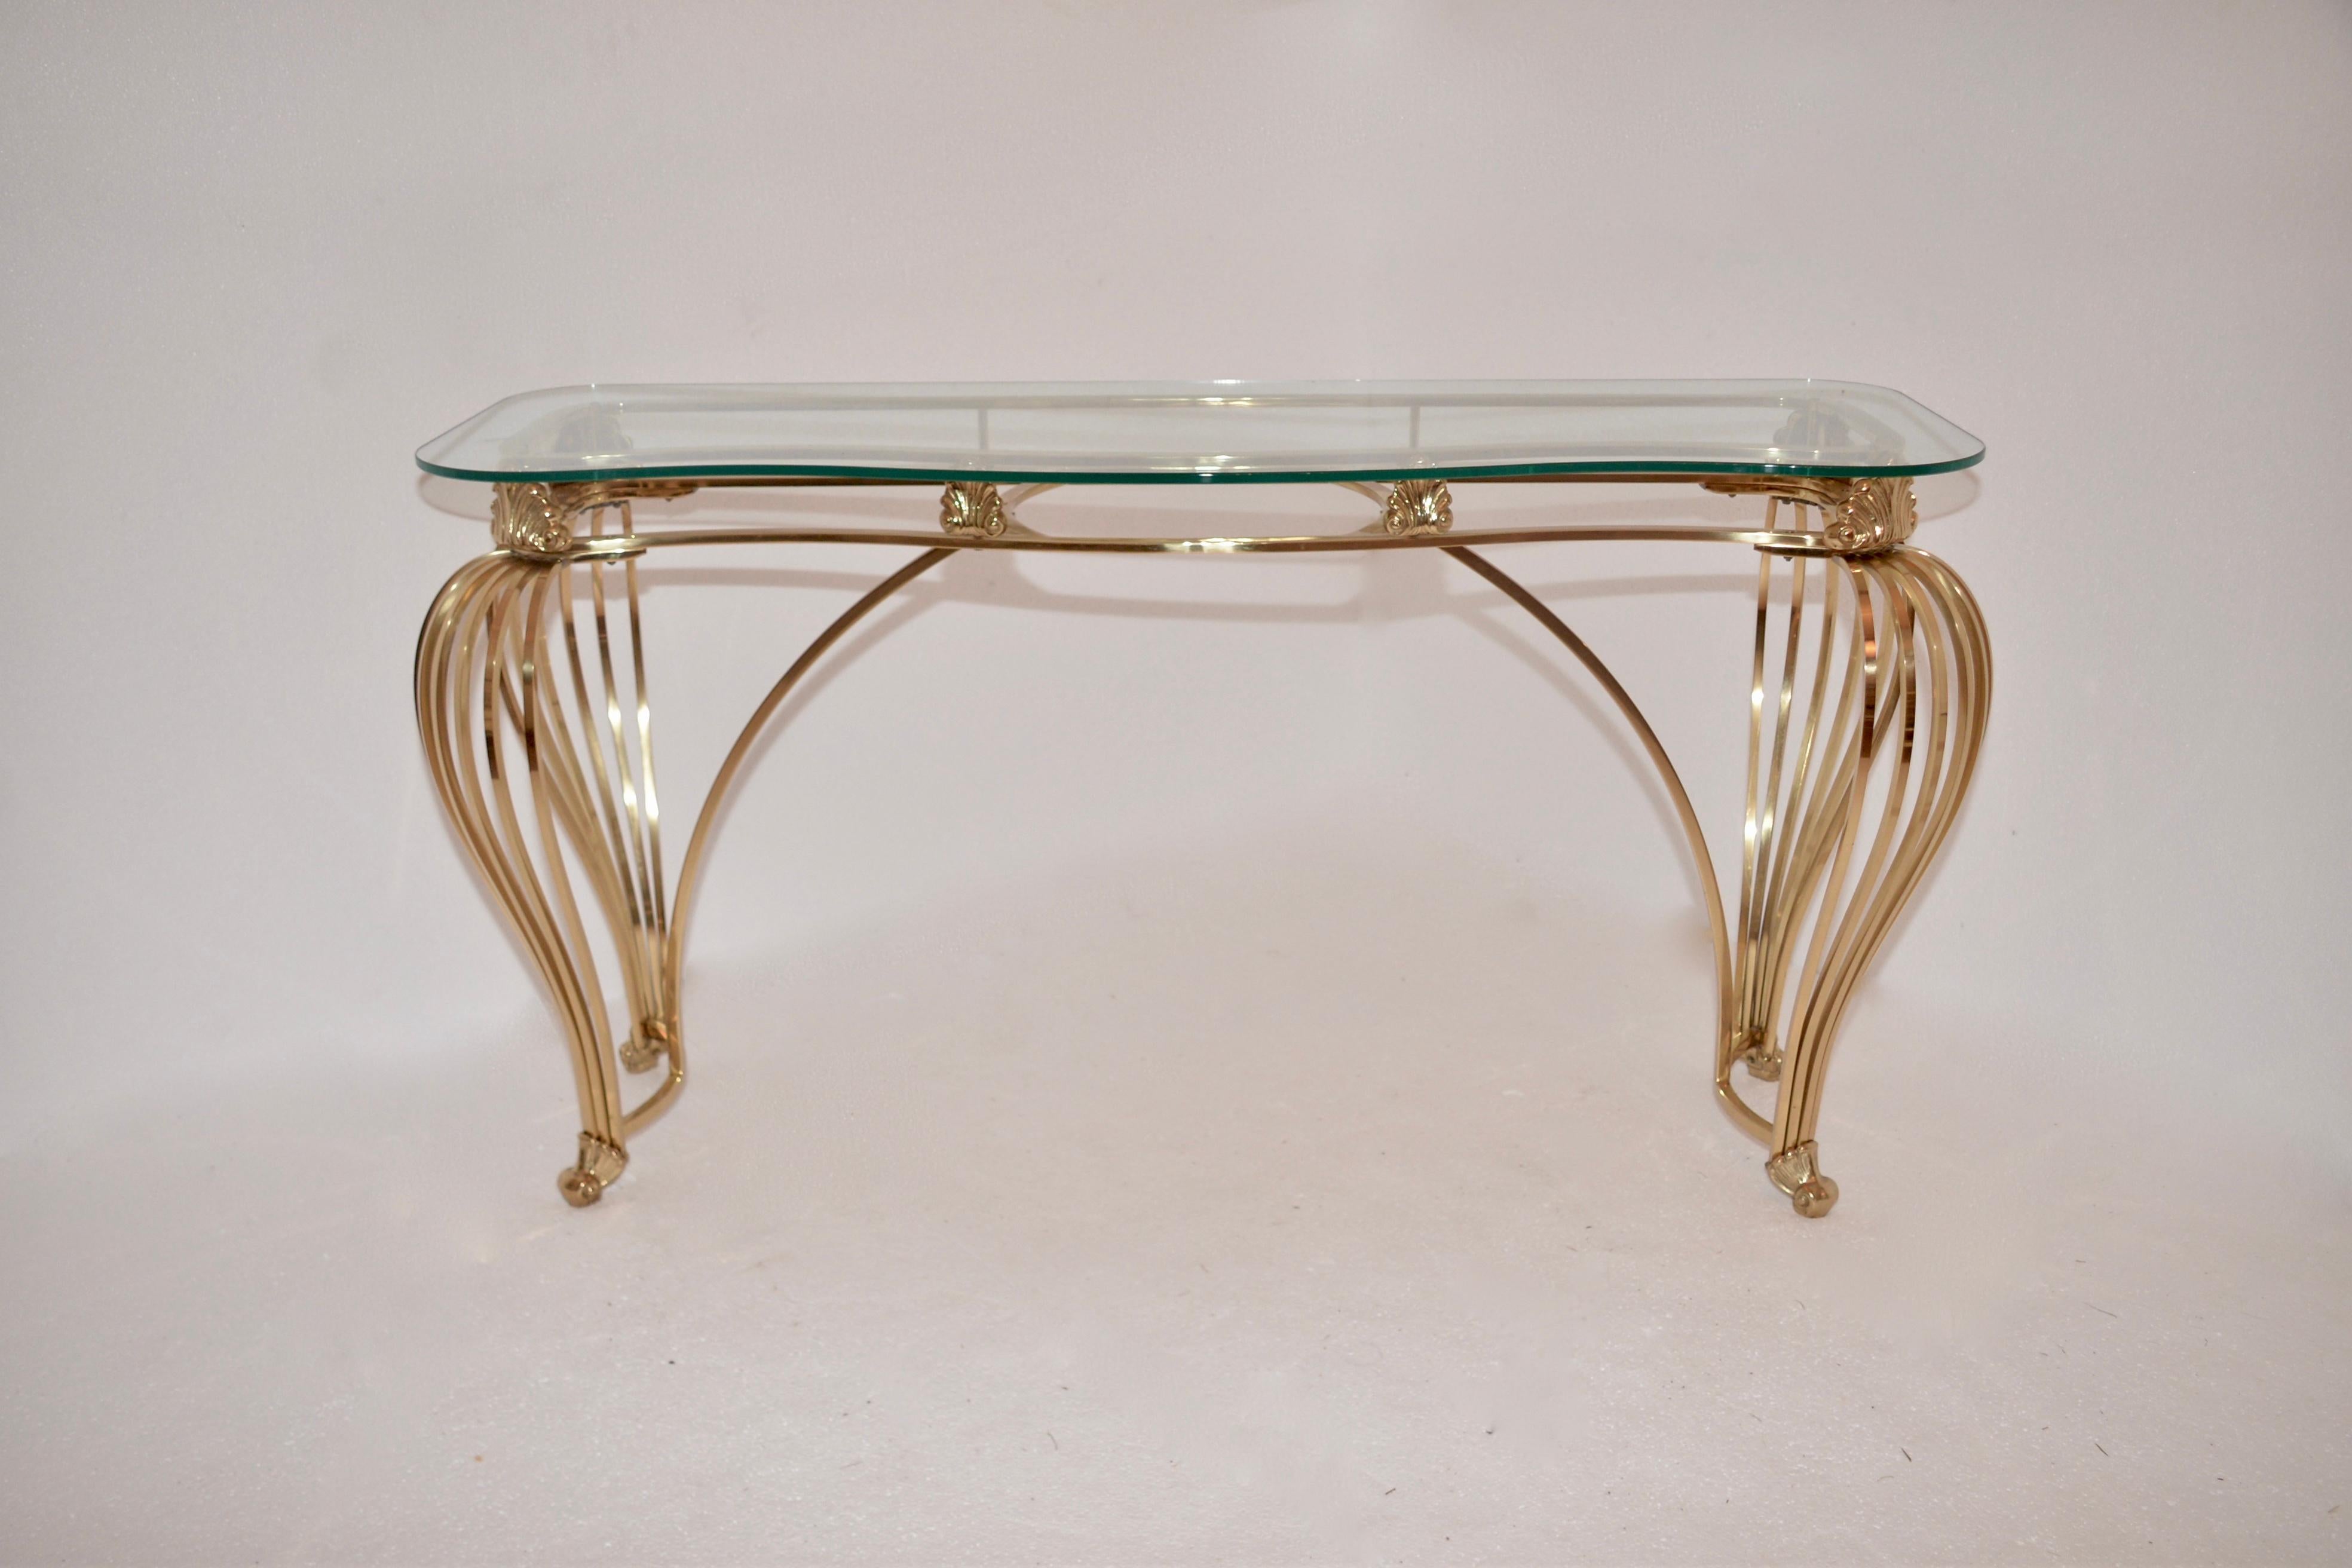 Vintage solid brass console table with scrolled legs and a tempered glass top.